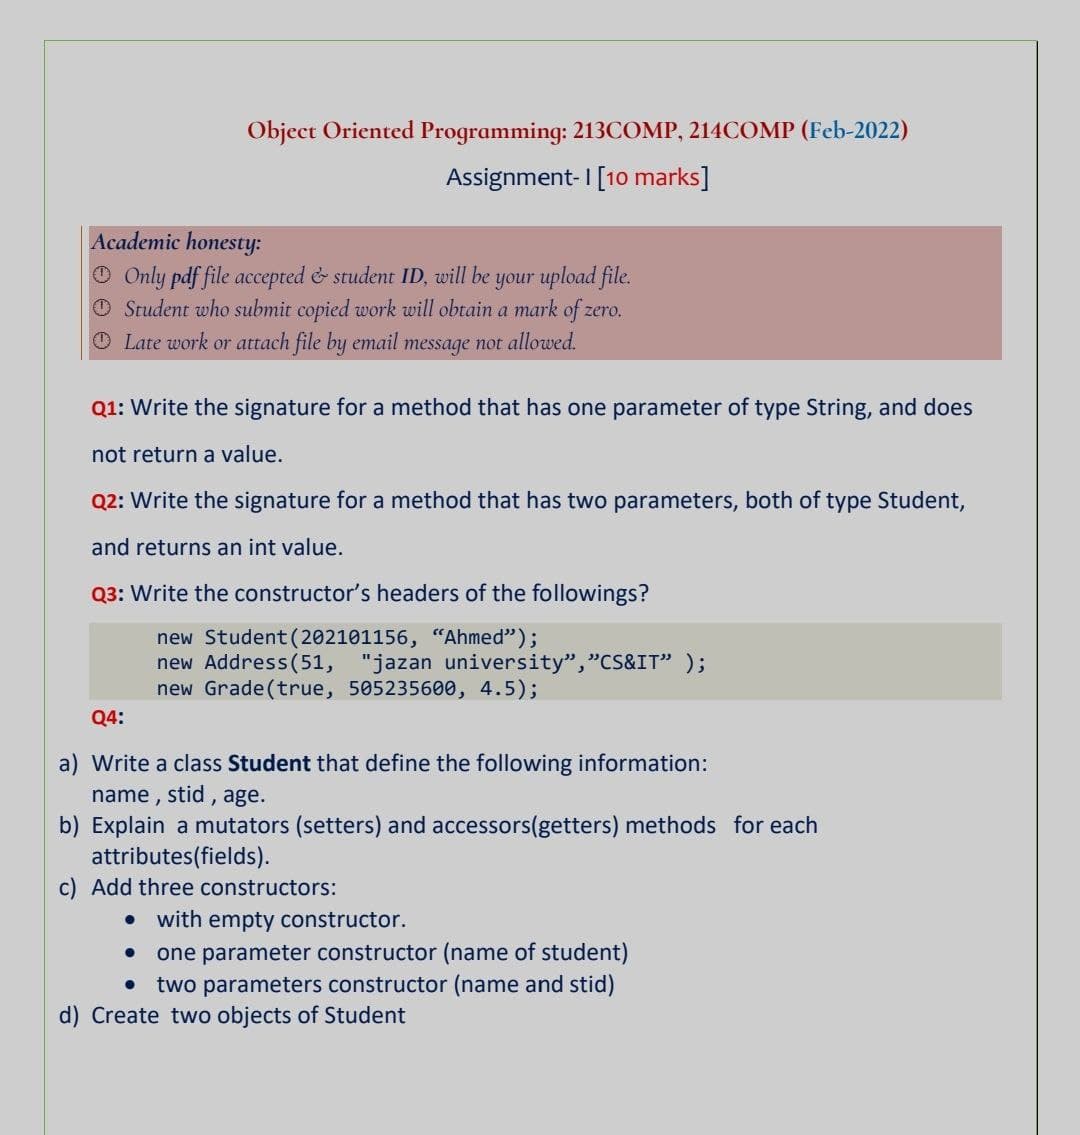 Object Oriented Programming: 213COMP, 214COMP (Feb-2022)
Assignment- I [10 marks]
Academic honesty:
O Only pdf file accepted & student ID, will be your upload file.
O Student who submit copied work will obtain a mark of zero.
O Late work or attach file by email message not allowed.
Q1: Write the signature for a method that has one parameter of type String, and does
not return a value.
Q2: Write the signature for a method that has two parameters, both of type Student,
and returns an int value.
Q3: Write the constructor's headers of the followings?
new Student (202101156, “Ahmed");
new Address(51, "jazan university","CS&IT" );
new Grade(true, 505235600, 4.5);
Q4:
a) Write a class Student that define the following information:
name, stid , age.
b) Explain a mutators (setters) and accessors(getters) methods for each
attributes(fields).
c) Add three constructors:
• with empty constructor.
one parameter constructor (name of student)
two parameters constructor (name and stid)
d) Create two objects of Student
